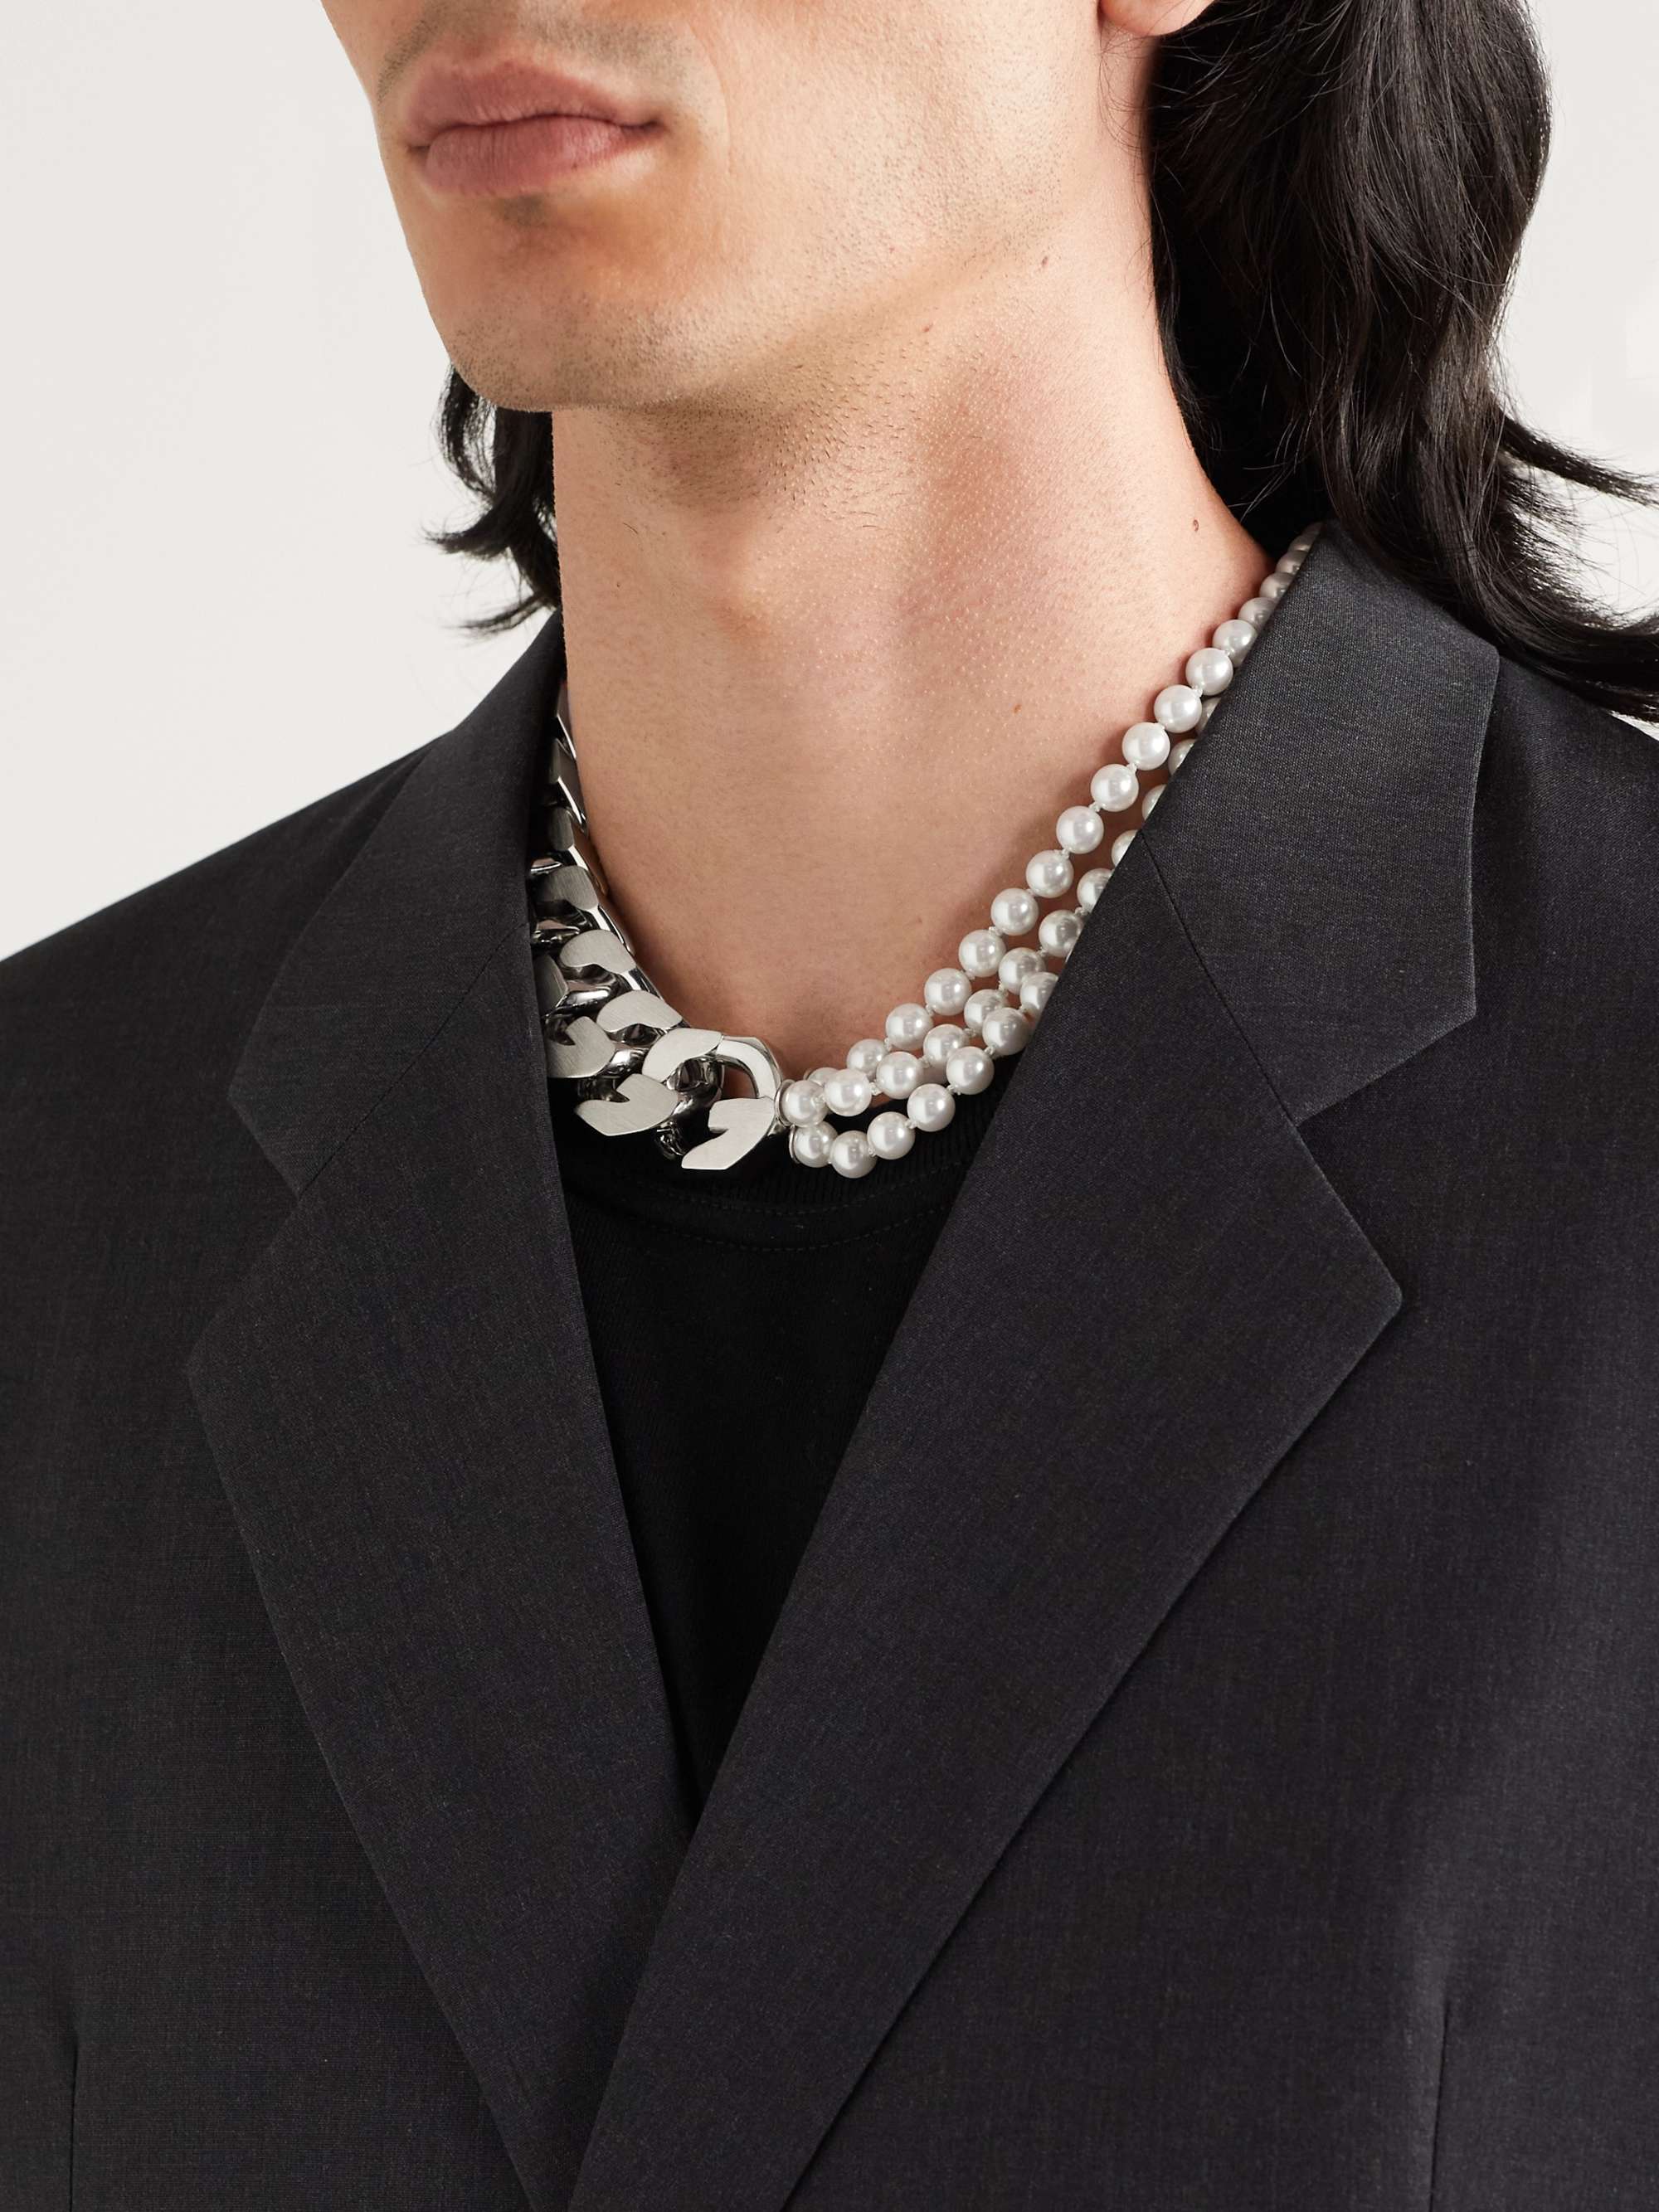 GIVENCHY Silver-Tone Faux Pearl Necklace | MR PORTER